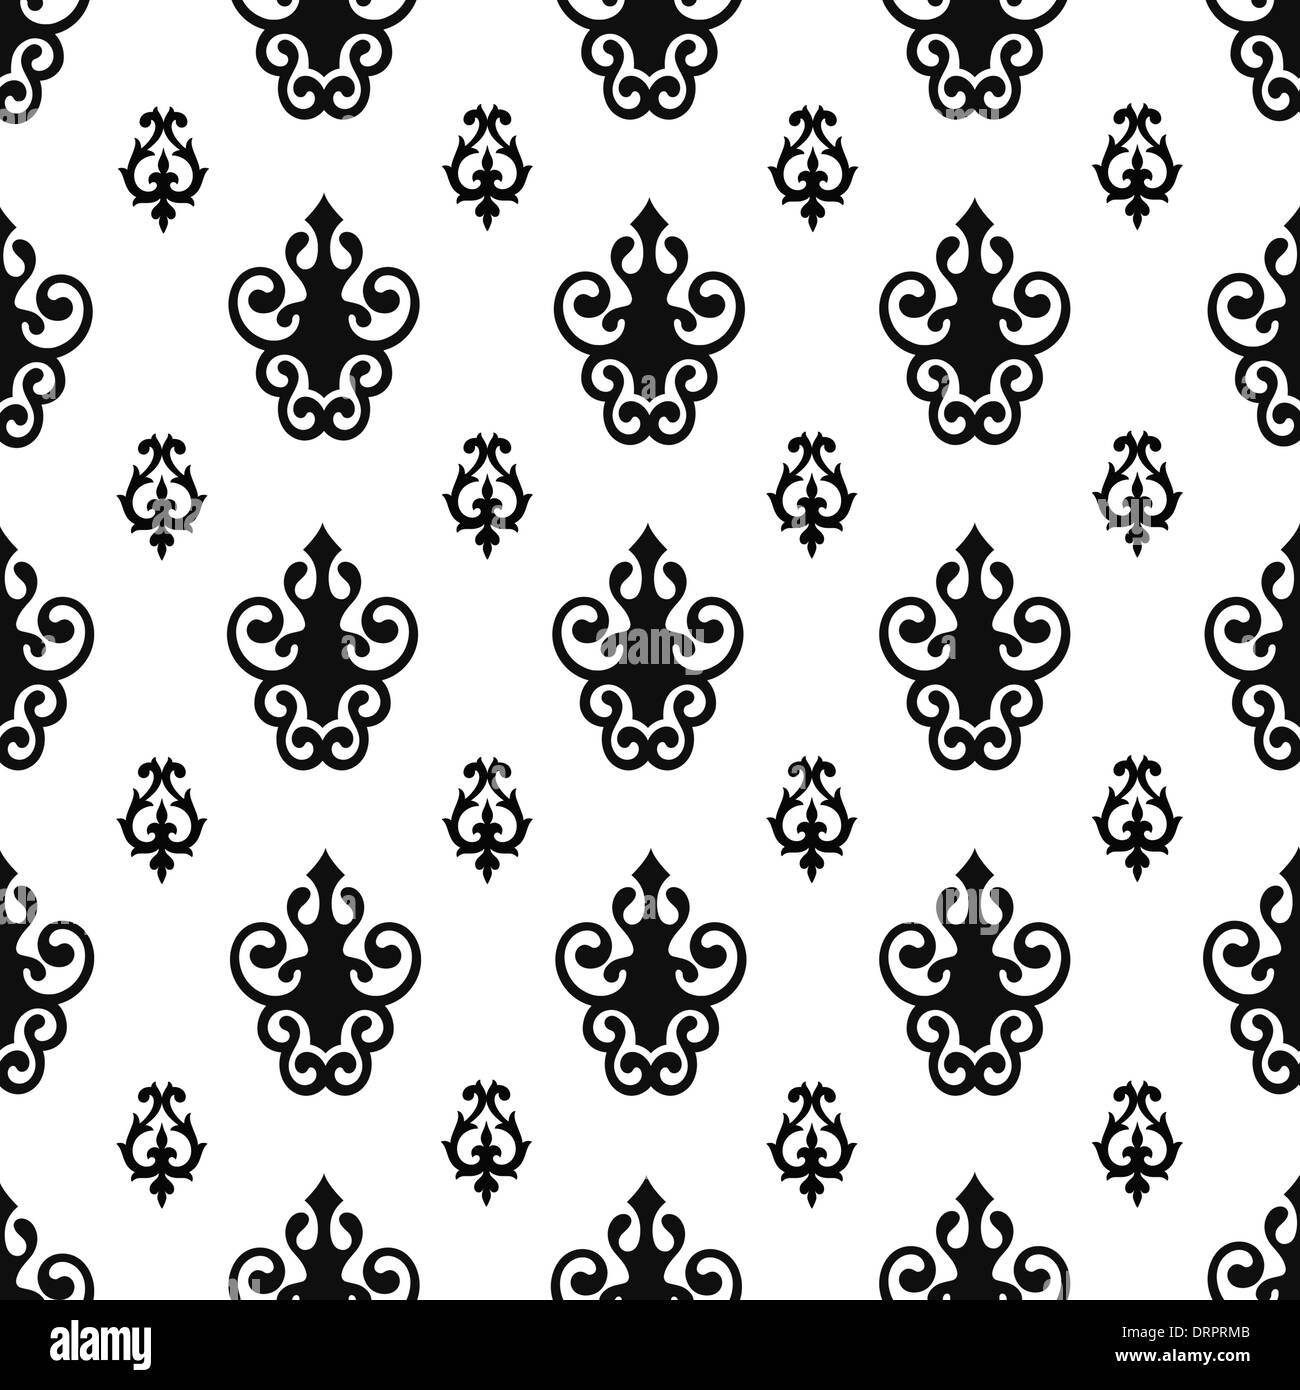 Seamless floral pattern Stock Photo